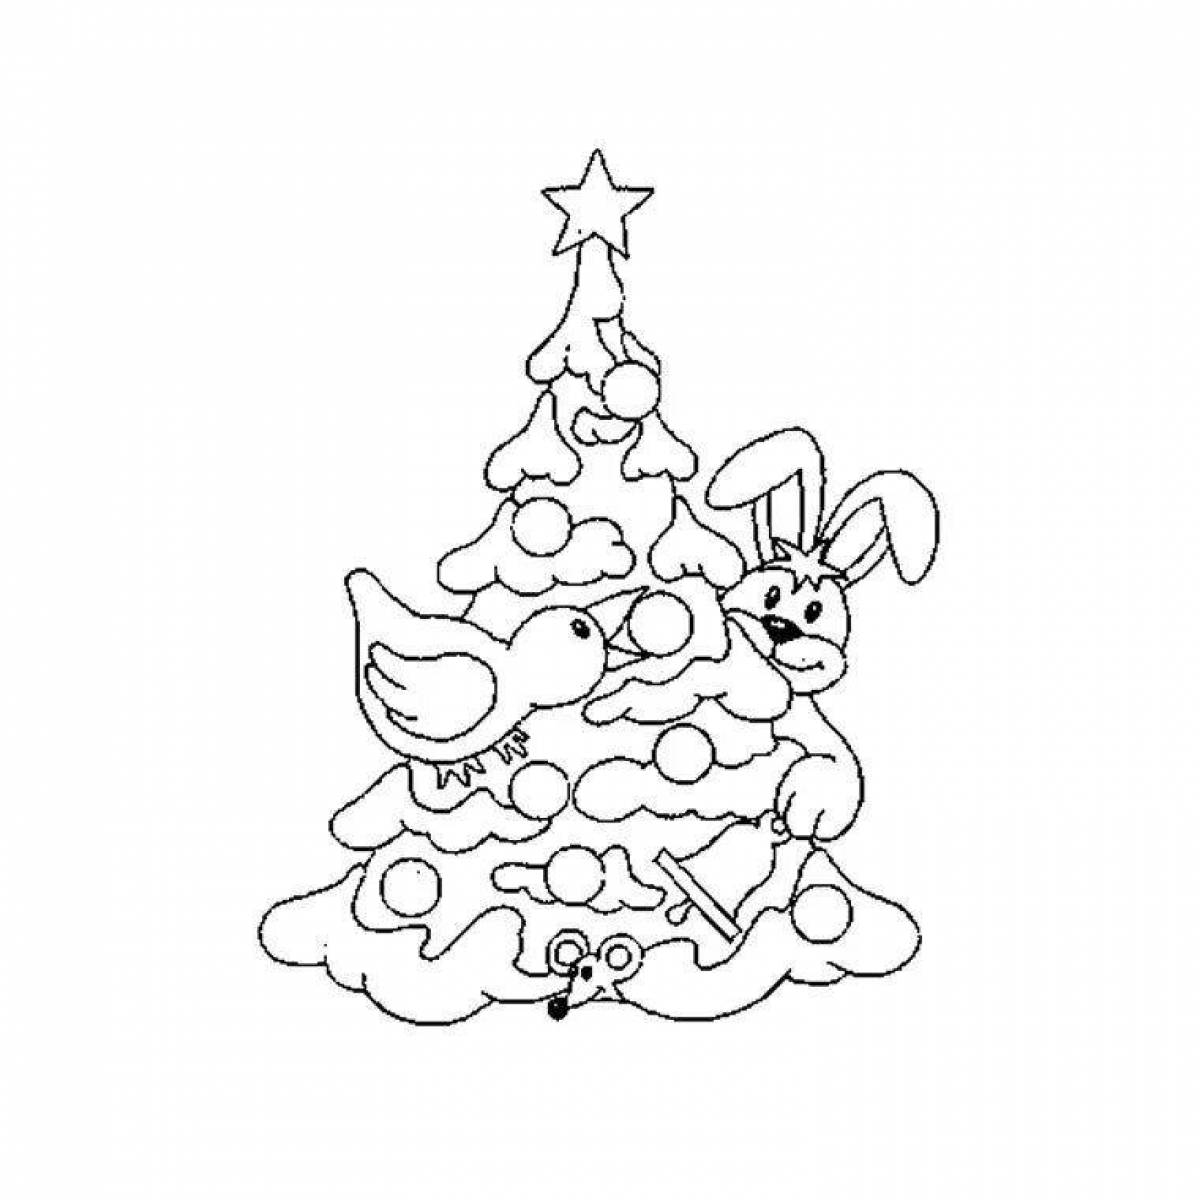 Coloring book bright Christmas tree and rabbit